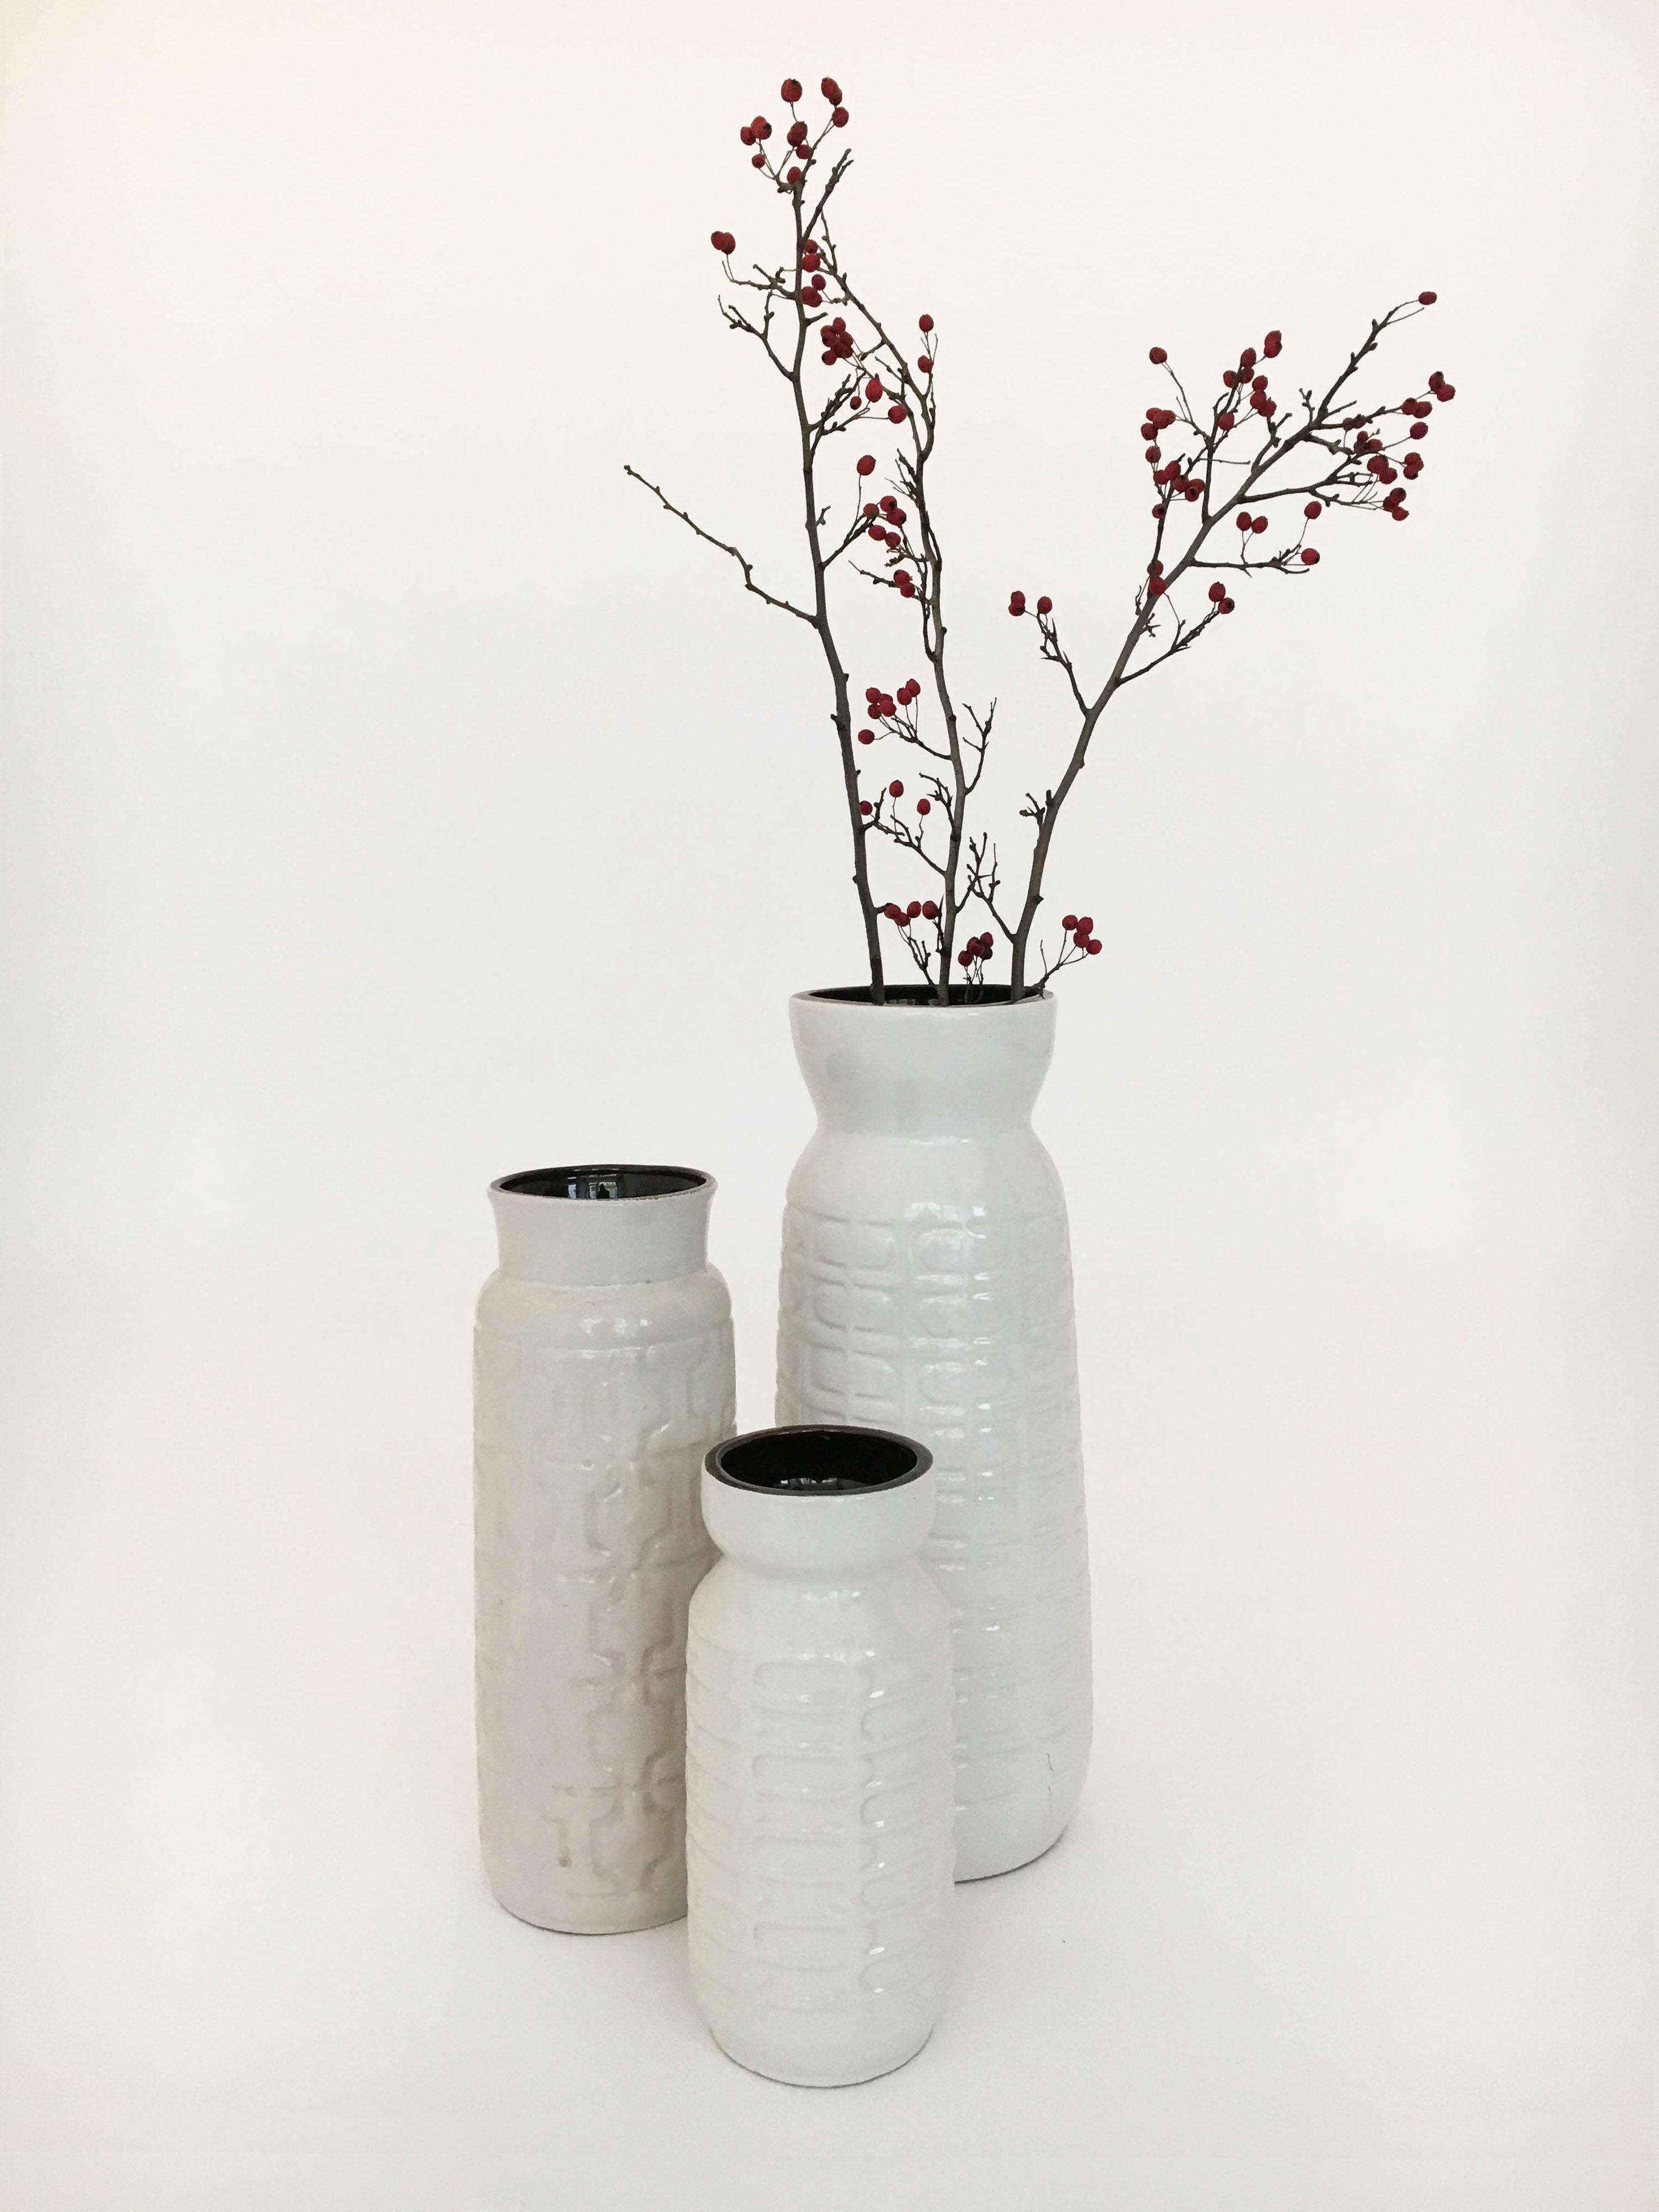 Beautiful set of three large Austrian pottery vessels vases, amazing glazes, in all modernist white, with a variations of minimal patterns on the outside. Contrasting dark brown glazed on the inside of the vessel, adding another layer of visual